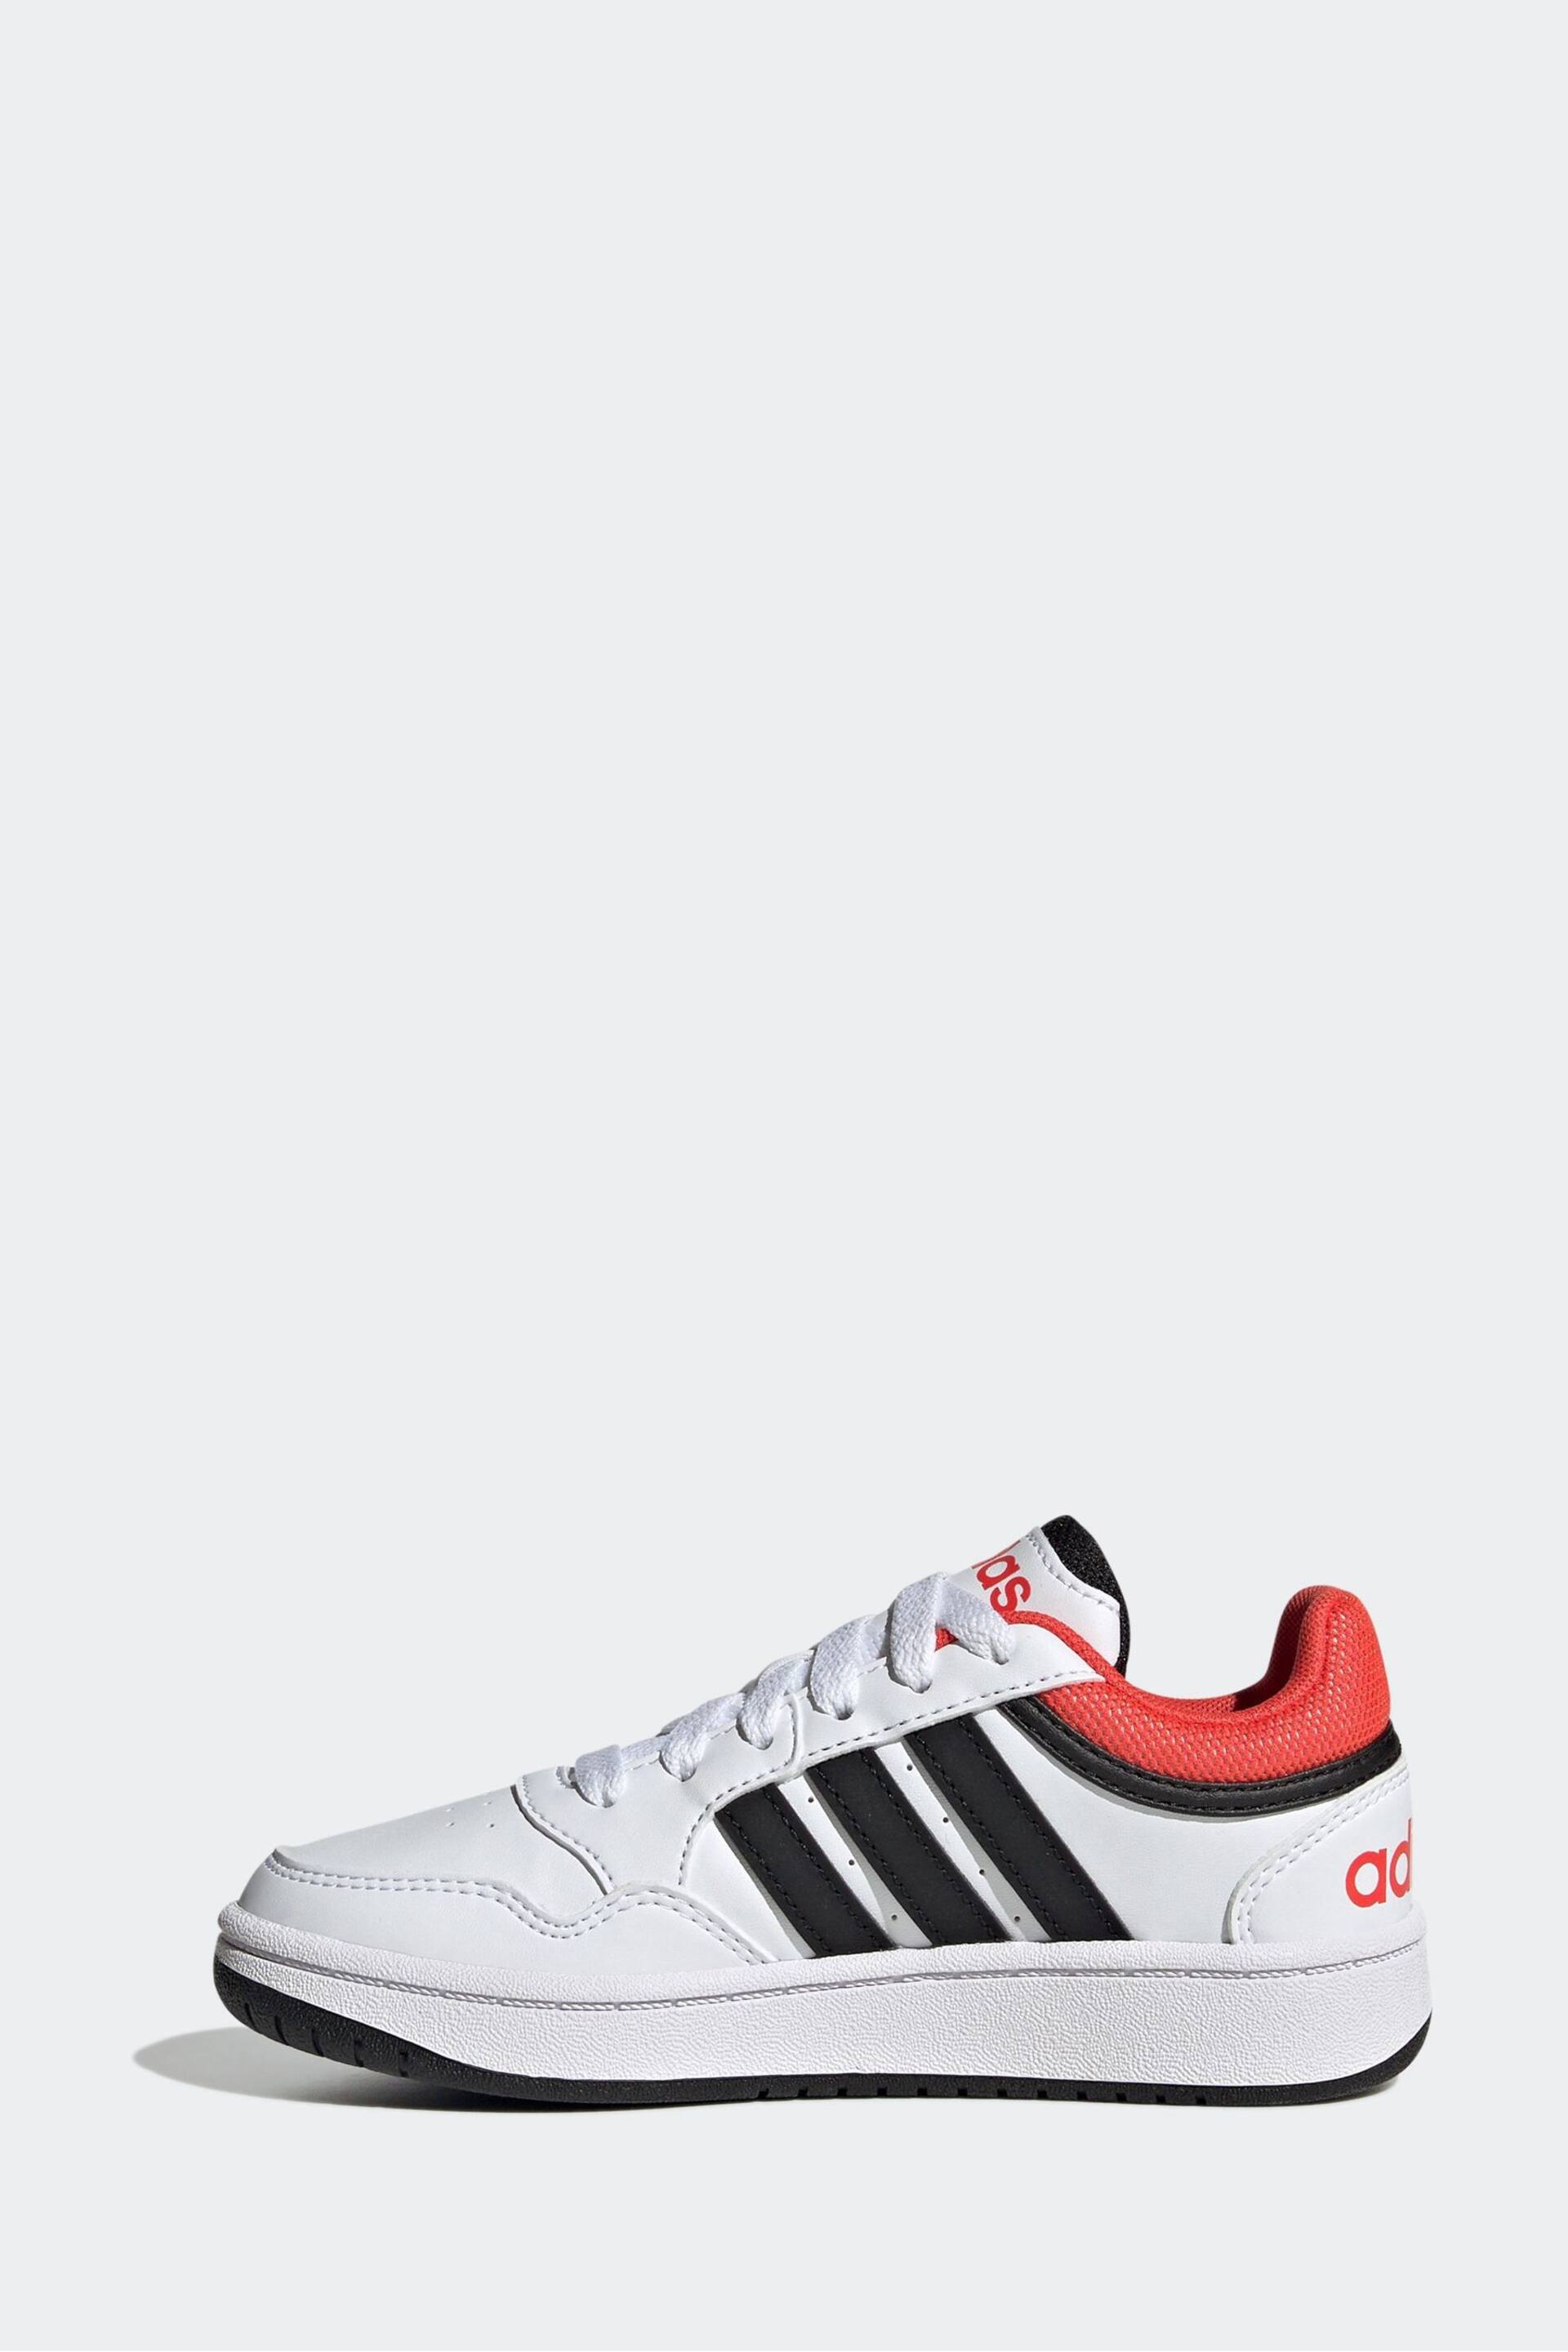 adidas White Hoops Trainers - Image 2 of 9